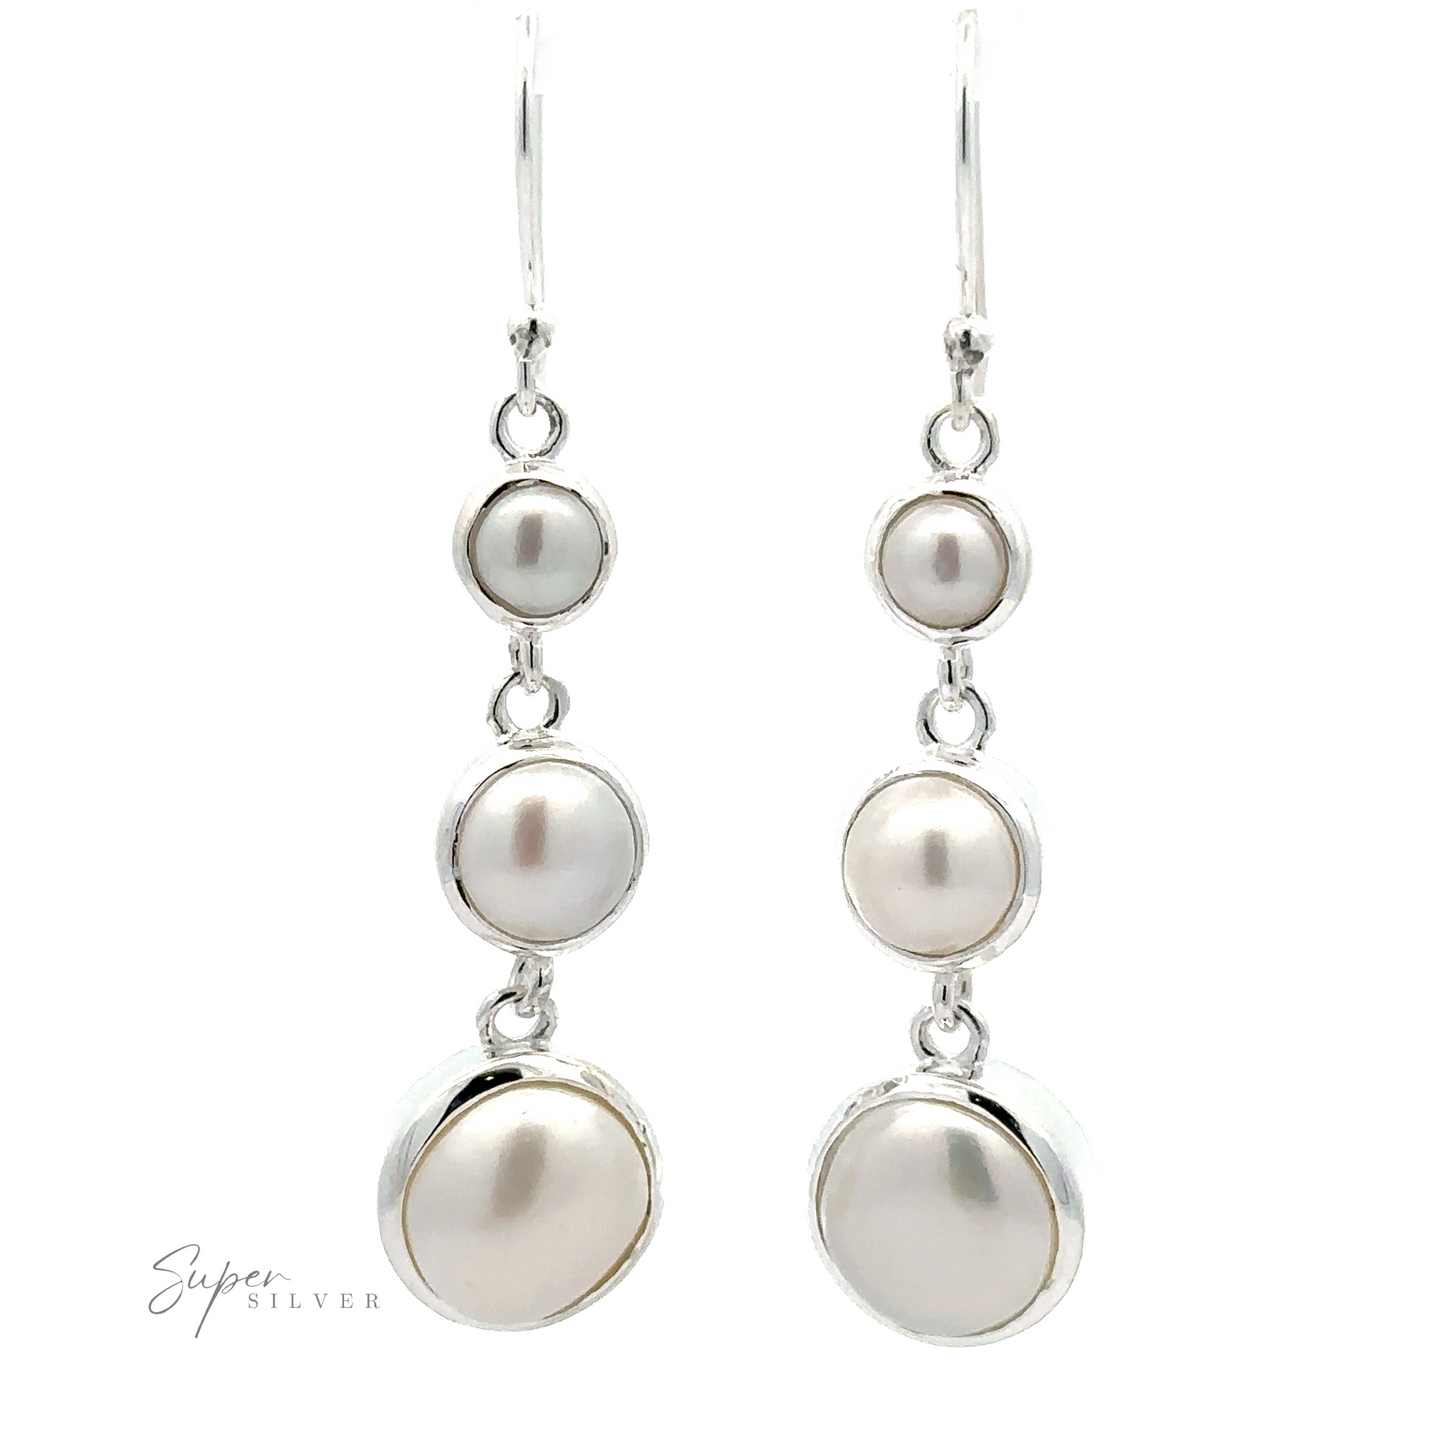 A pair of Graduating Pearl Earrings crafted in sterling silver, featuring three pearl-like stones arranged vertically in increasing size. The "Super Silver" logo is visible at the bottom left corner.